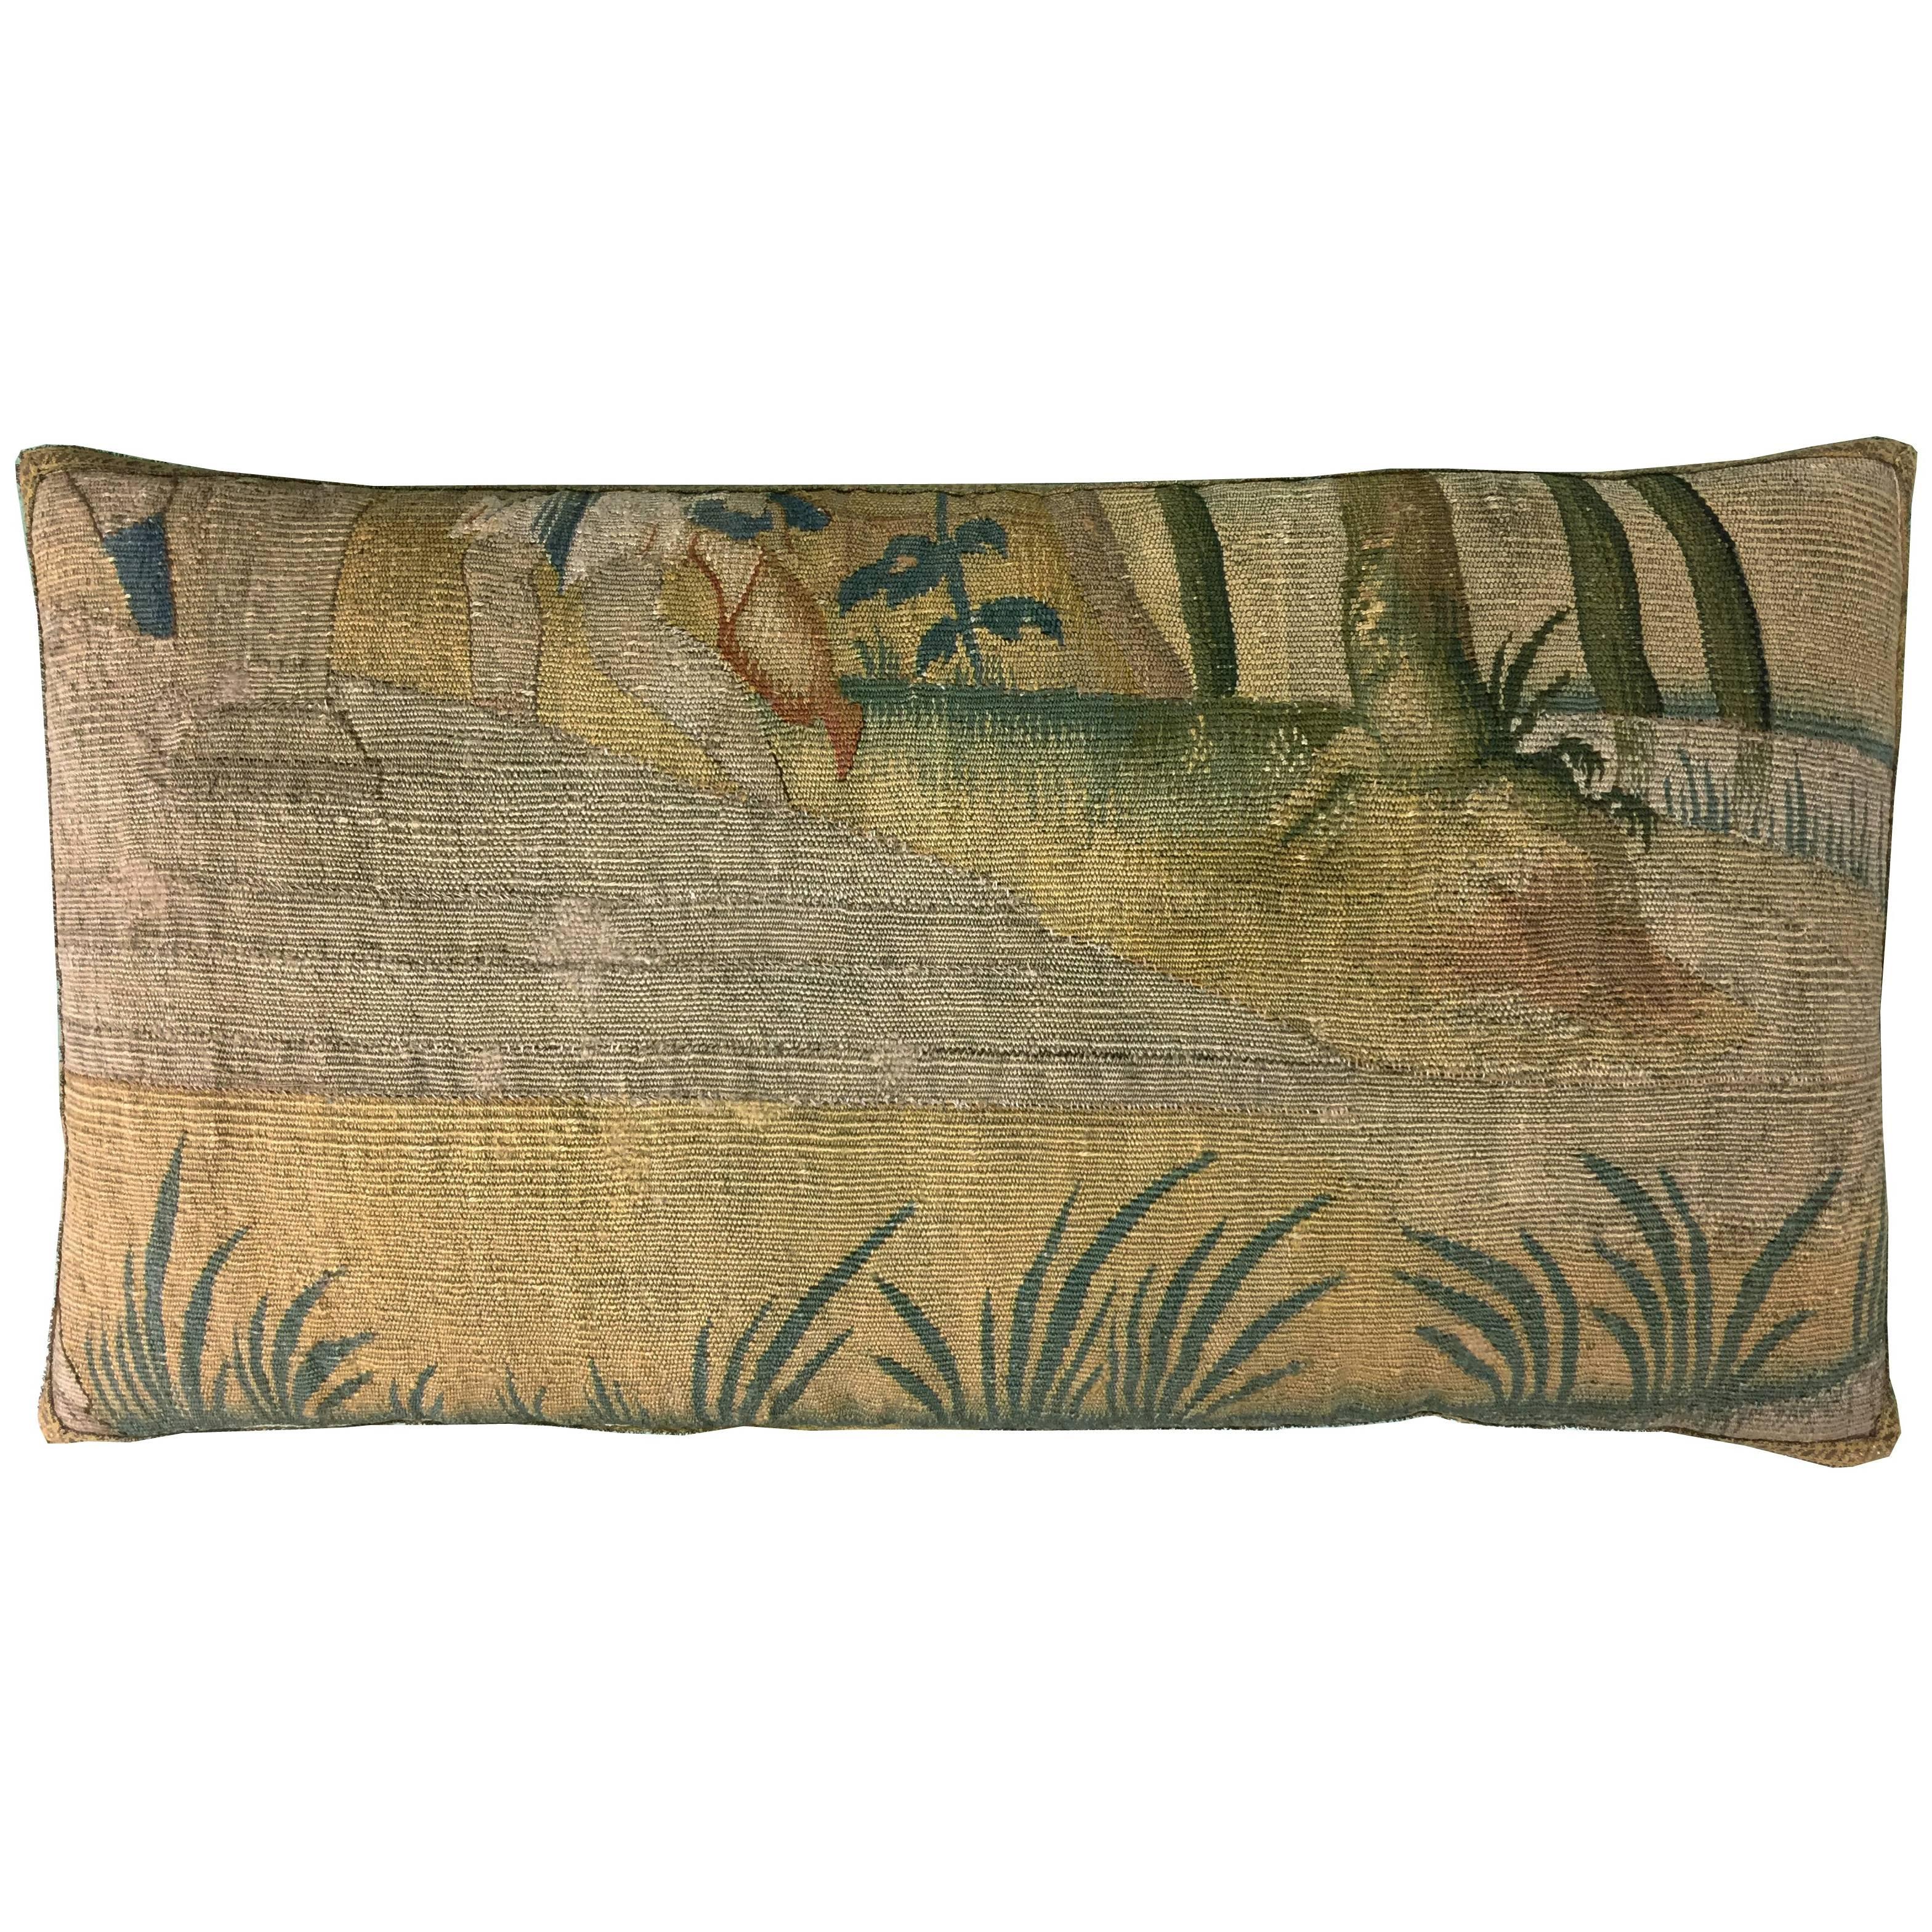 Brussels Baroque Tapestry Pillow, circa 17th Century 1648p